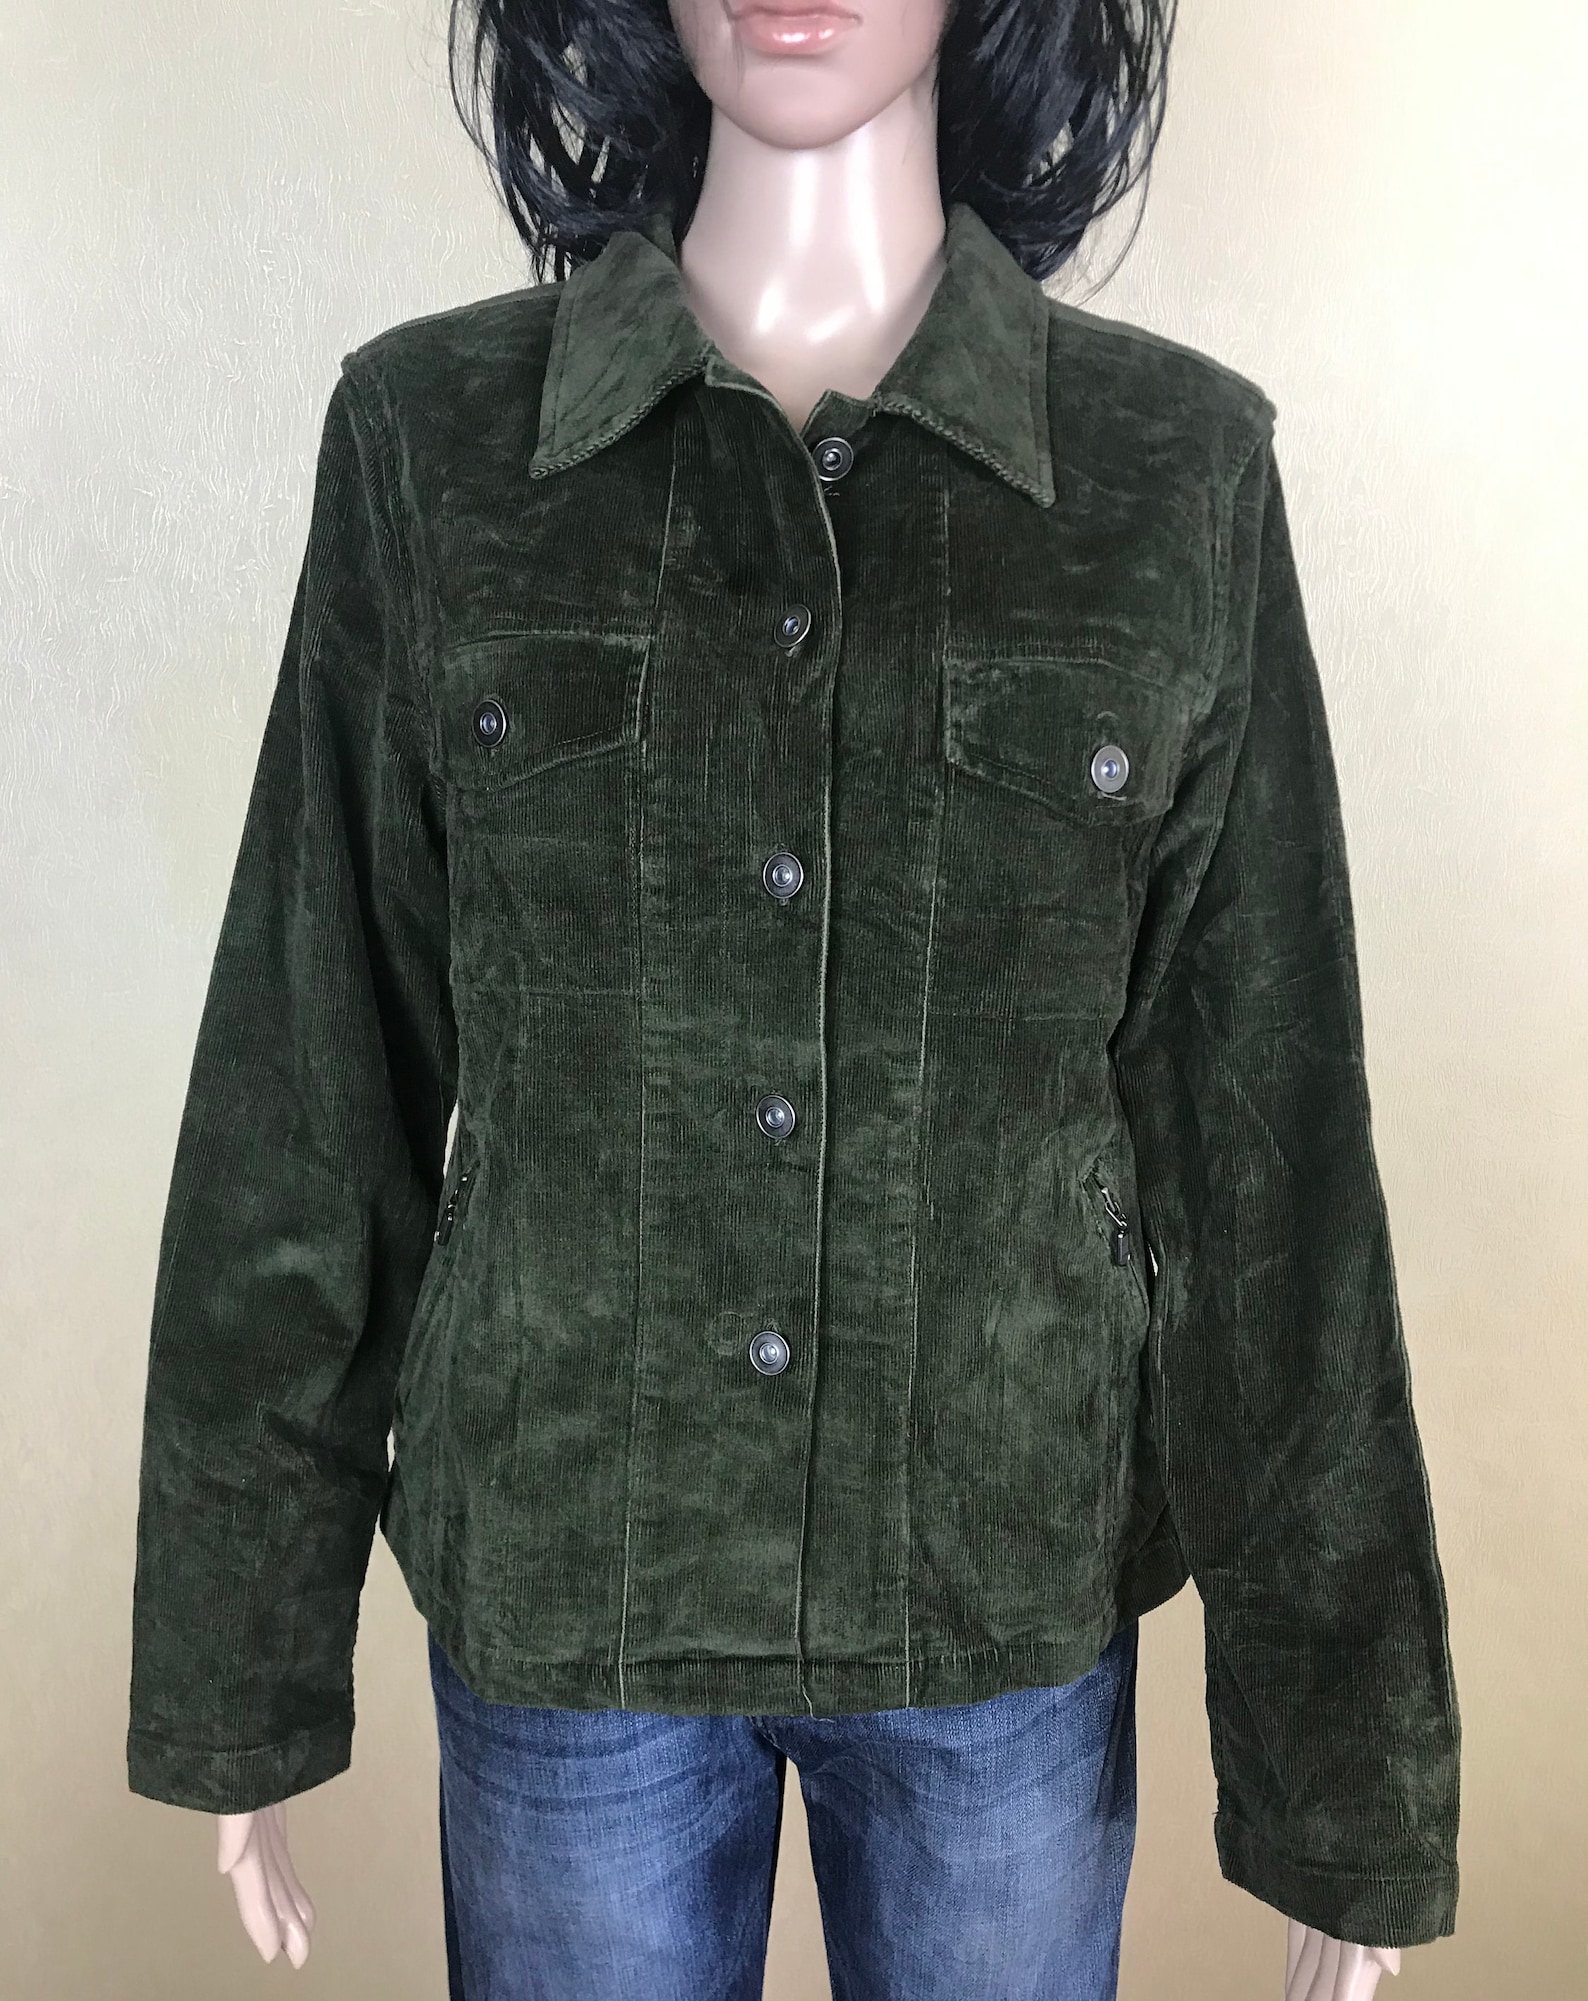 Women's Corduroy Moss Green Jacket by Christopher & Banks | Etsy